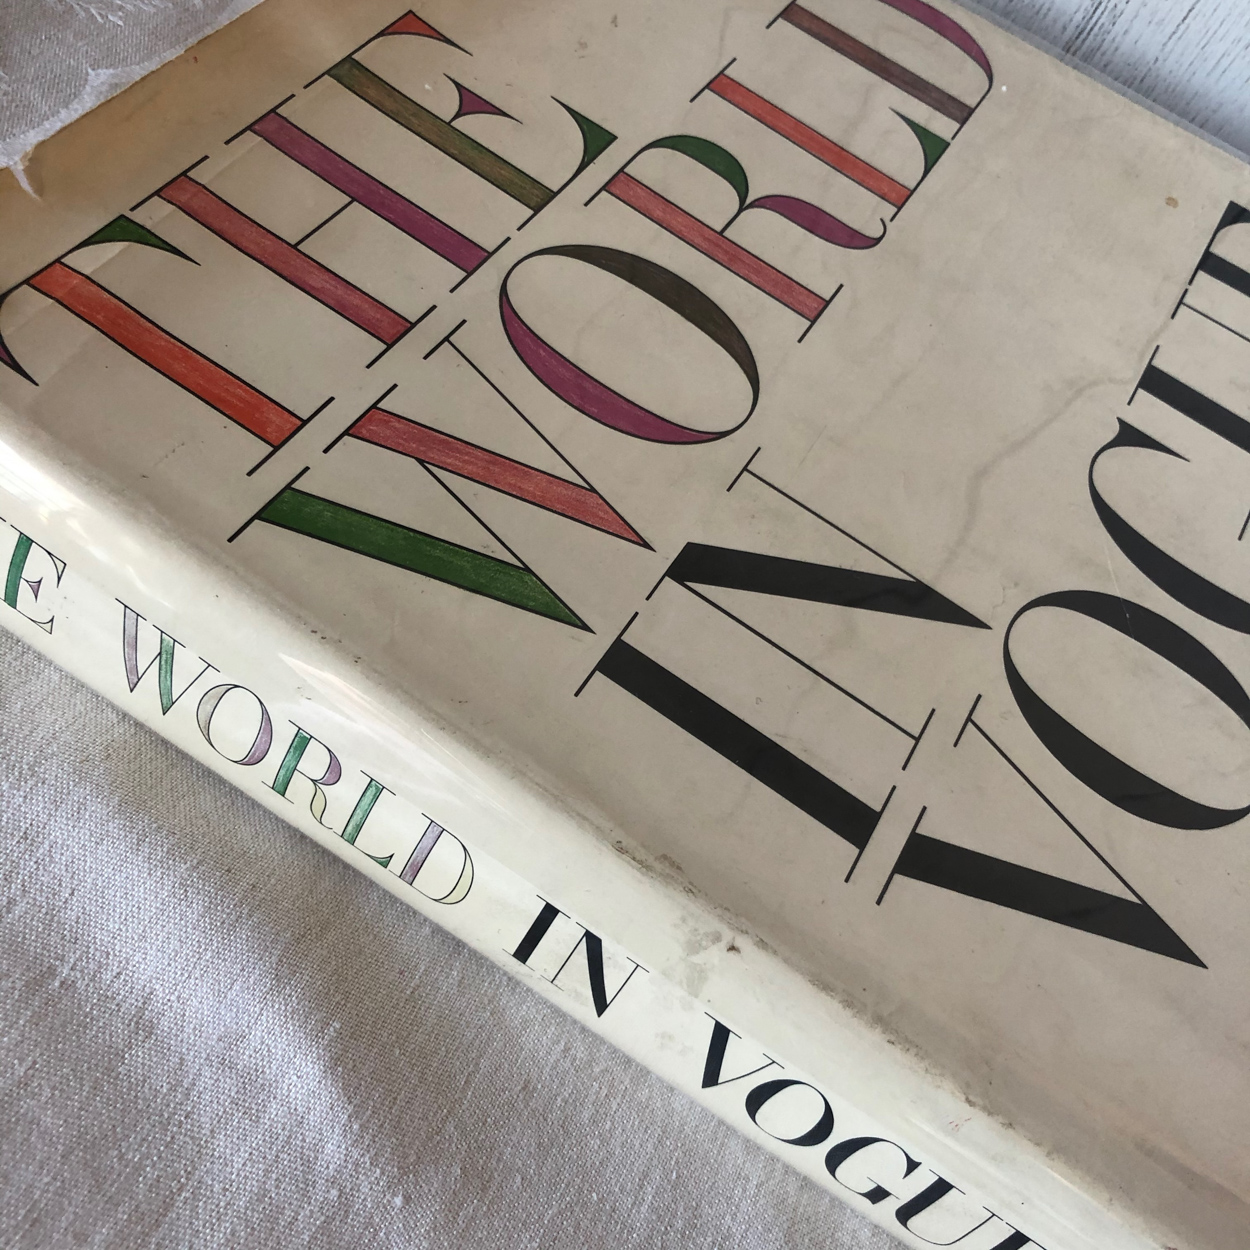 1963 THE WORLD IN VOGUE EDITED BY VIKING & VOGUE BOOK - GREAT PHOTOS - I  795 